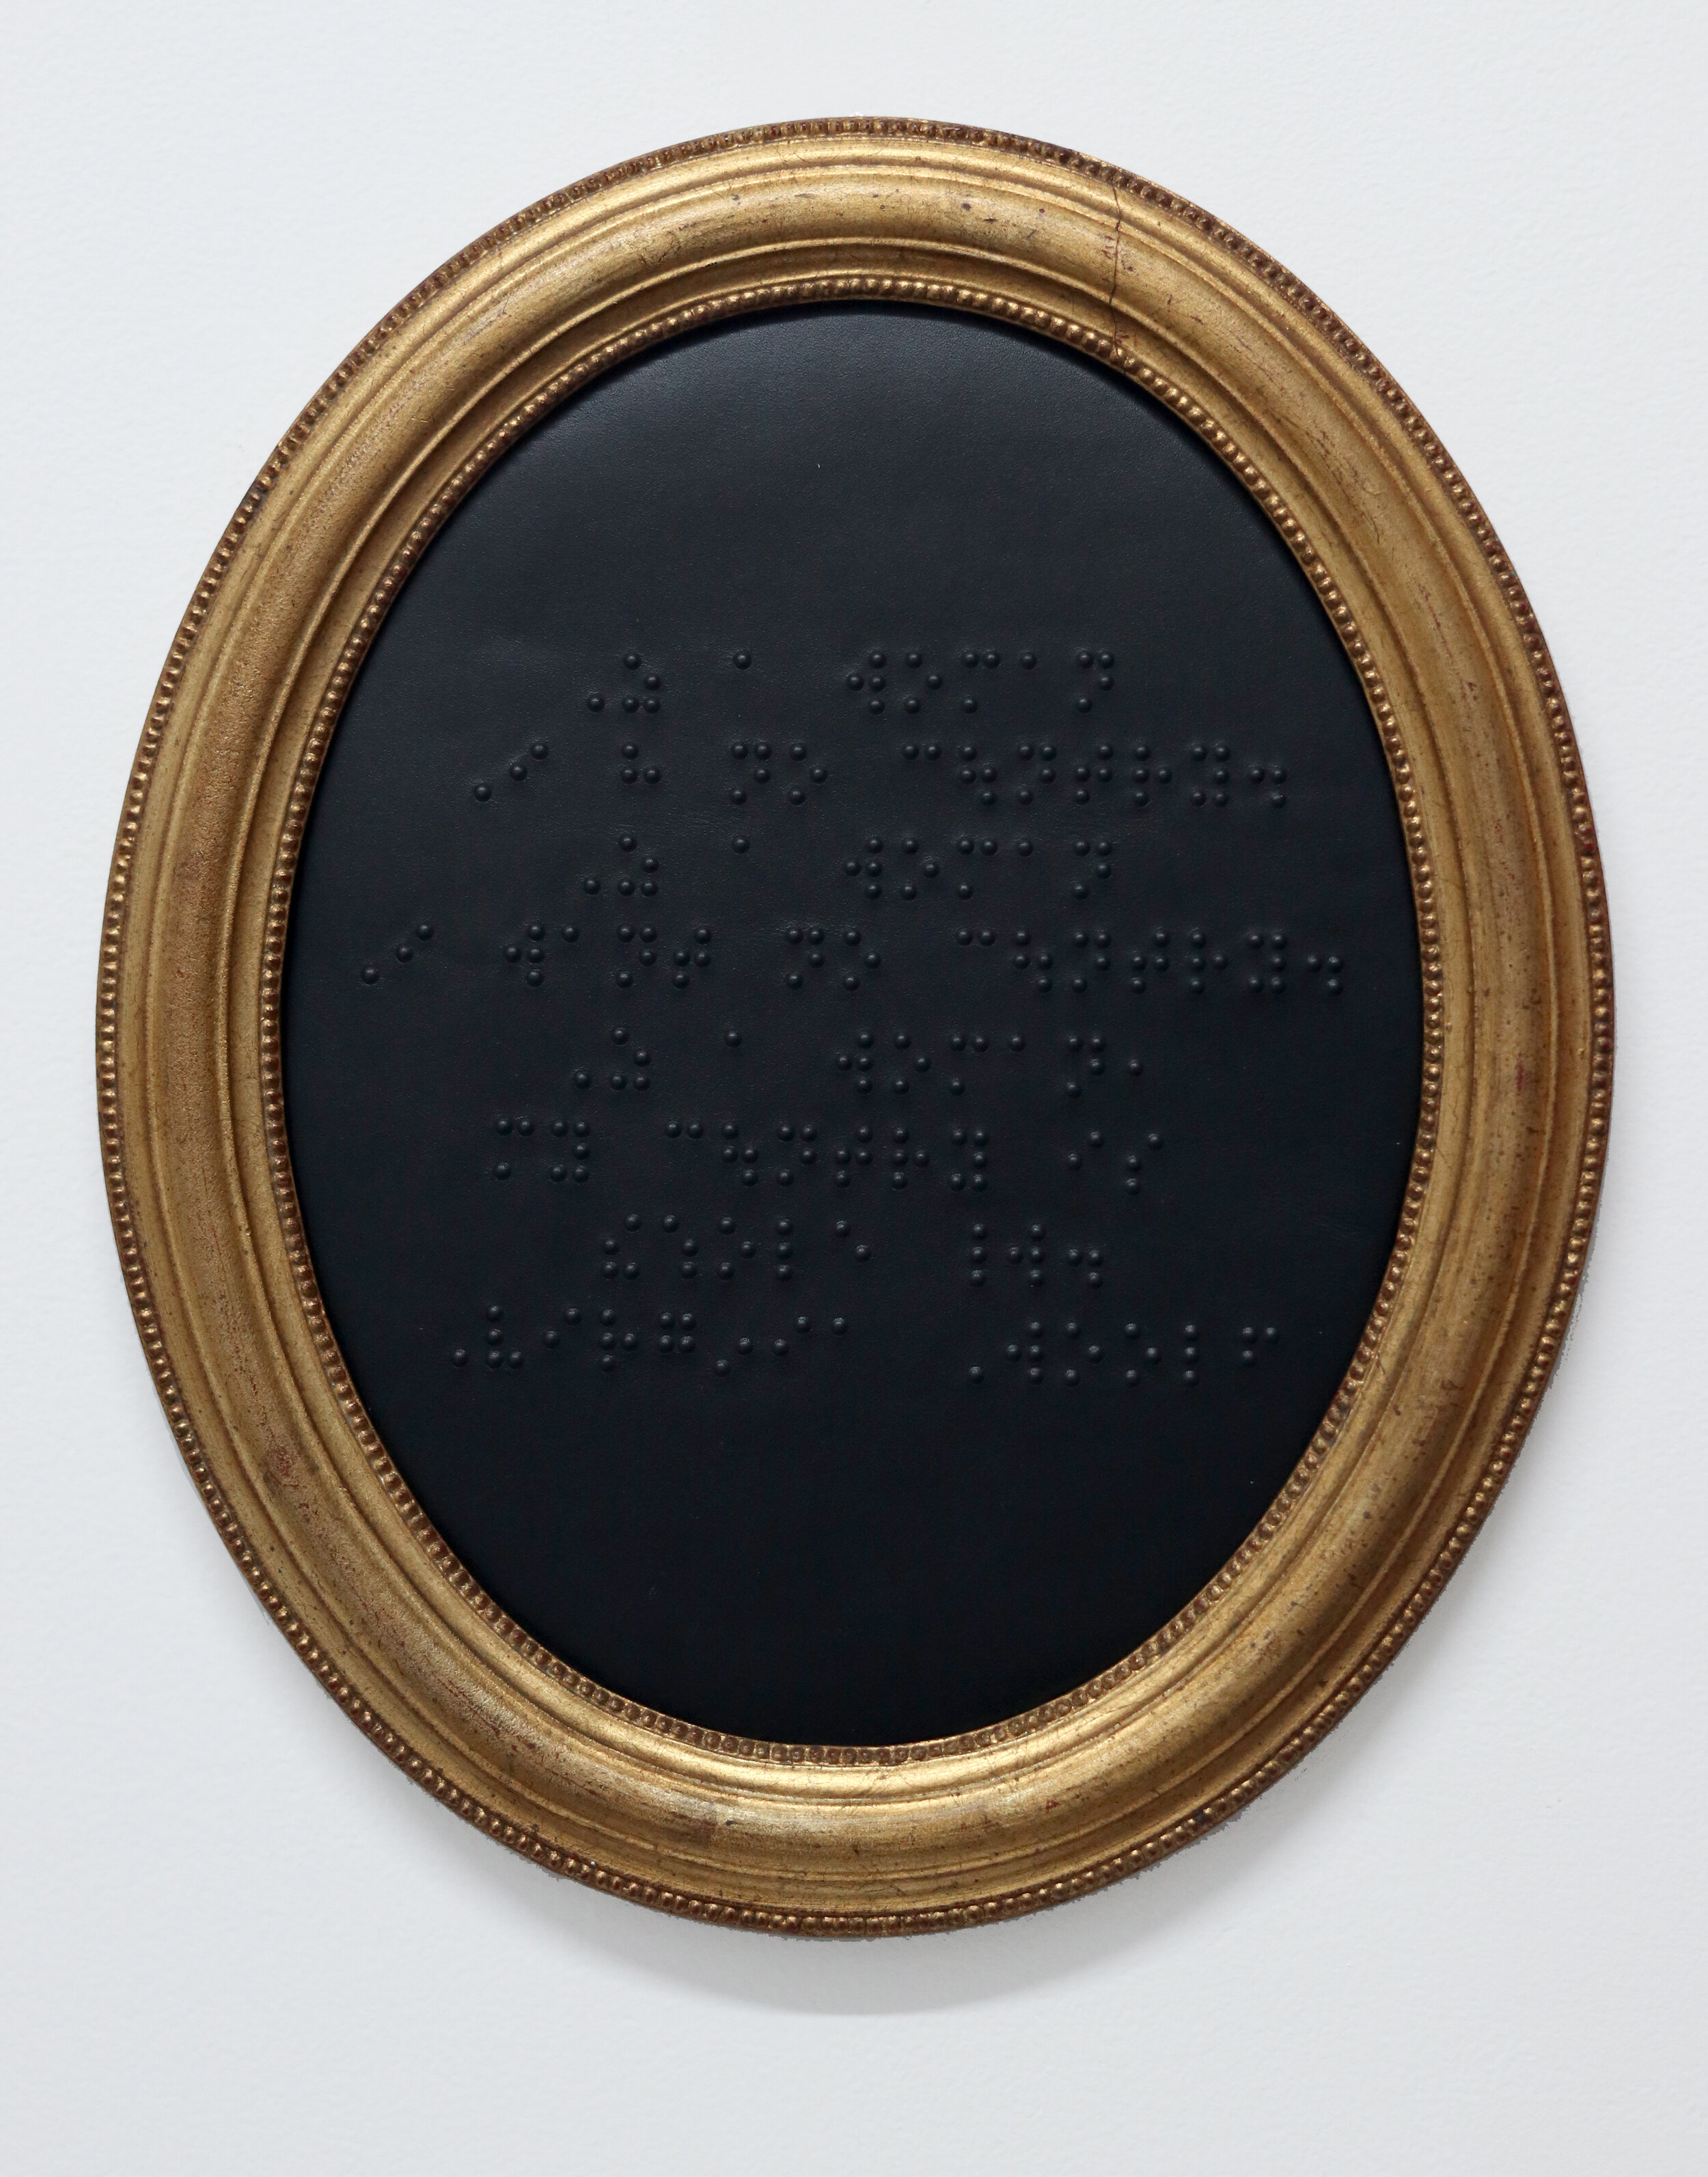  Jaye Moon  Black Mirror I (As a woman, I have no country. As a woman I want no country. As a woman my country is the whole world - Virginia Woolf)  2020  Virginia Woolf’s quote embossed on black leather mounted on mirror in gilded frame  14 x 11 ½ i